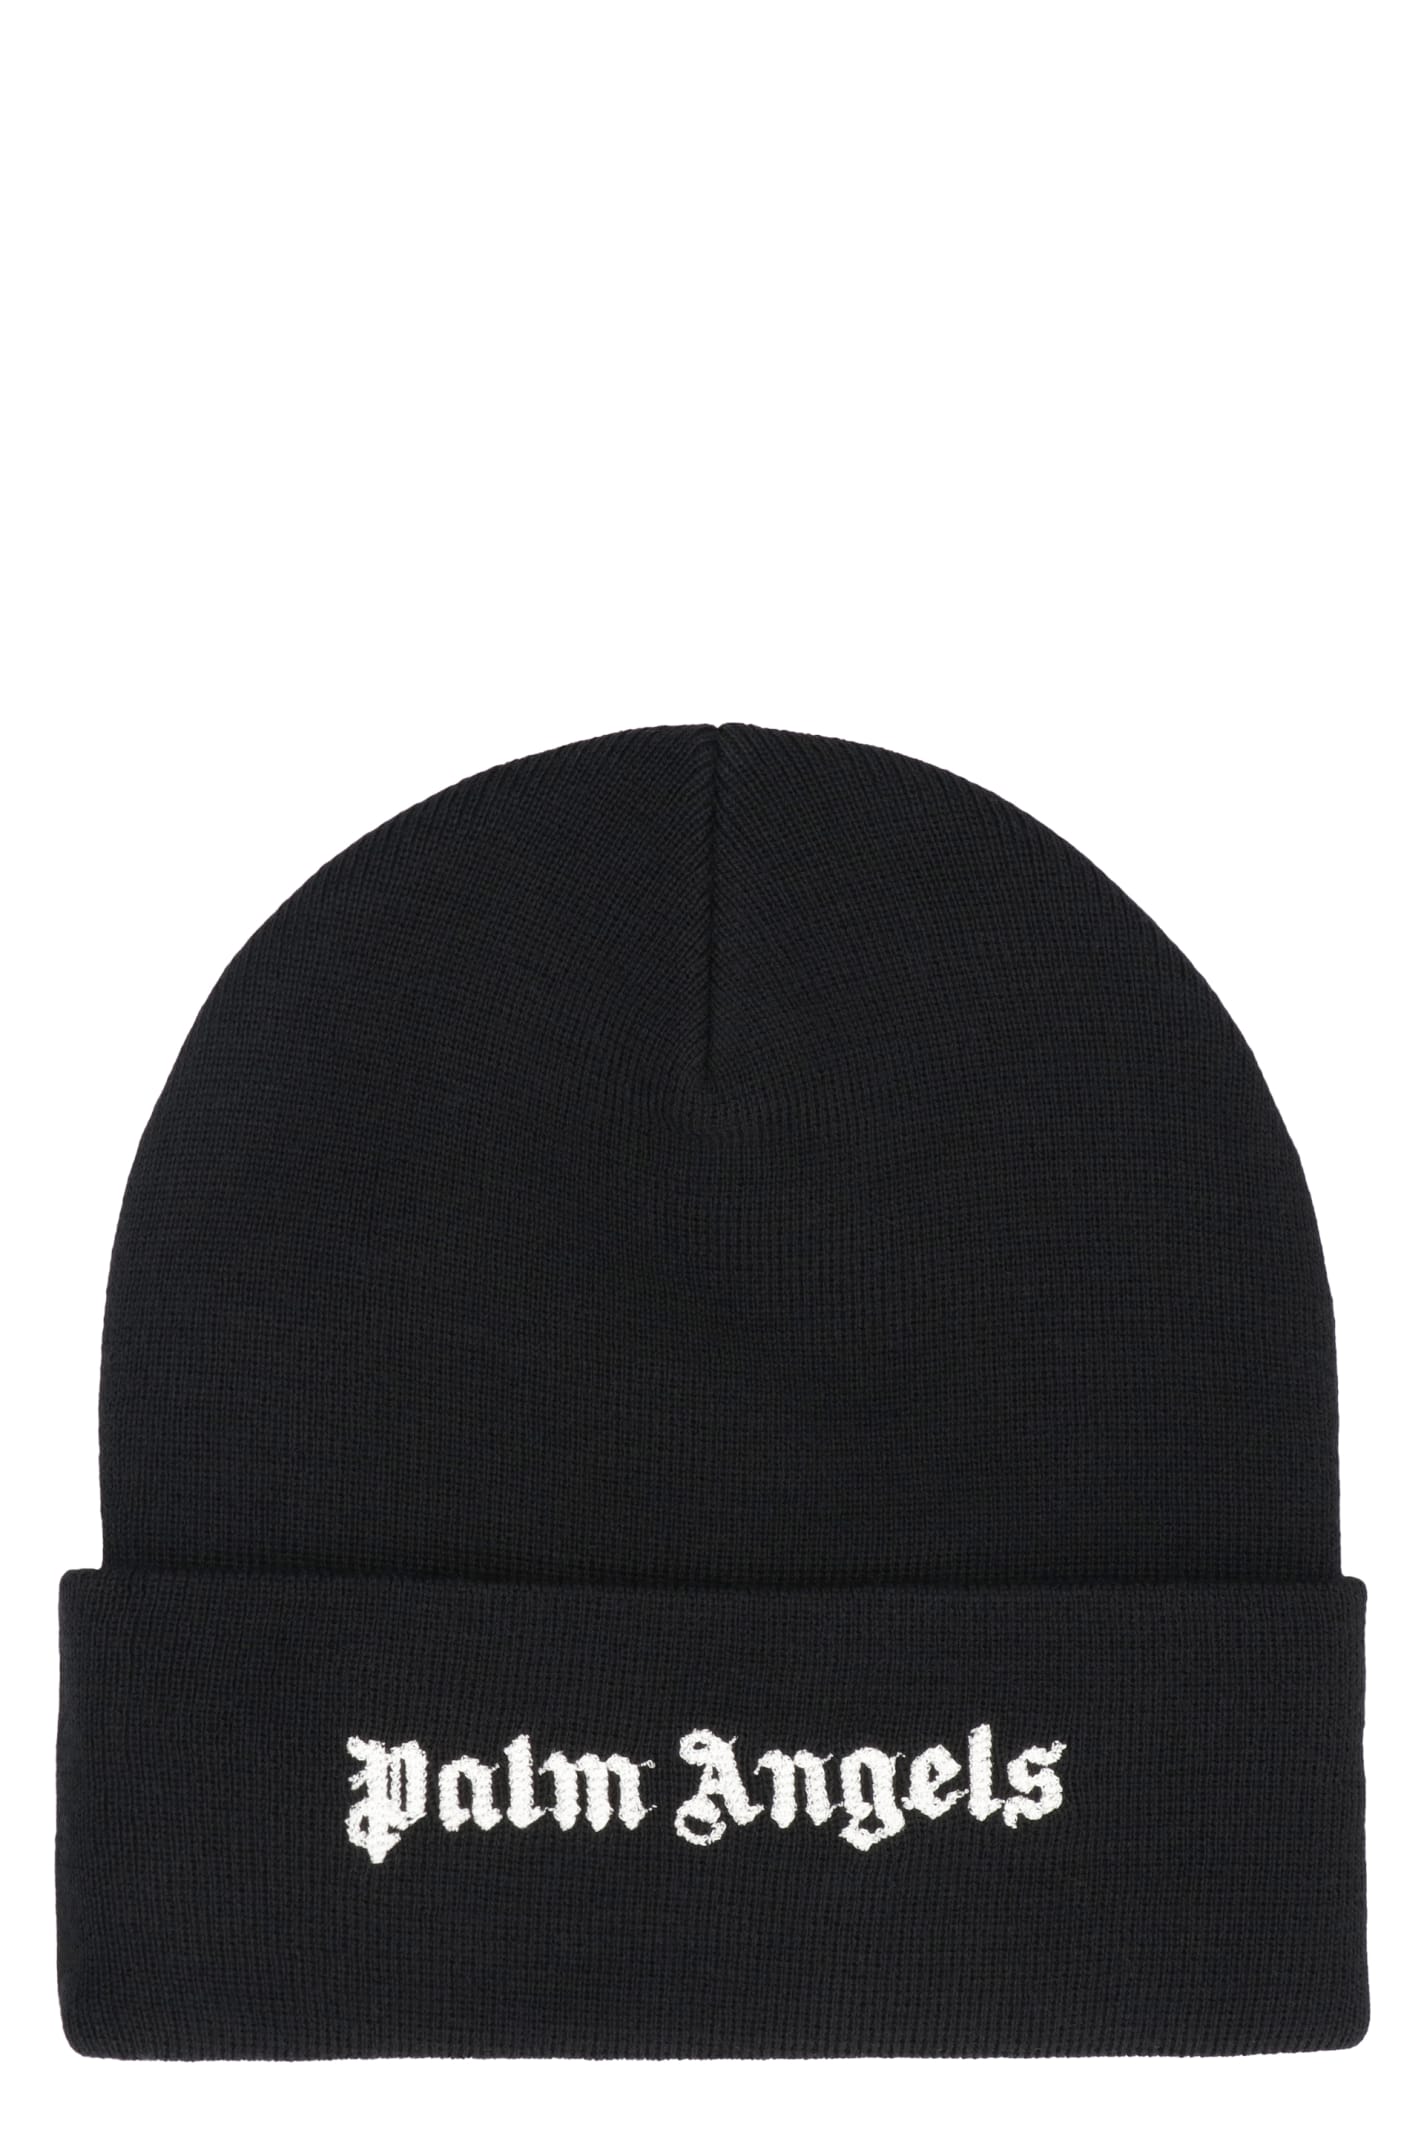 Palm Angels Ribbed Knit Beanie In Black